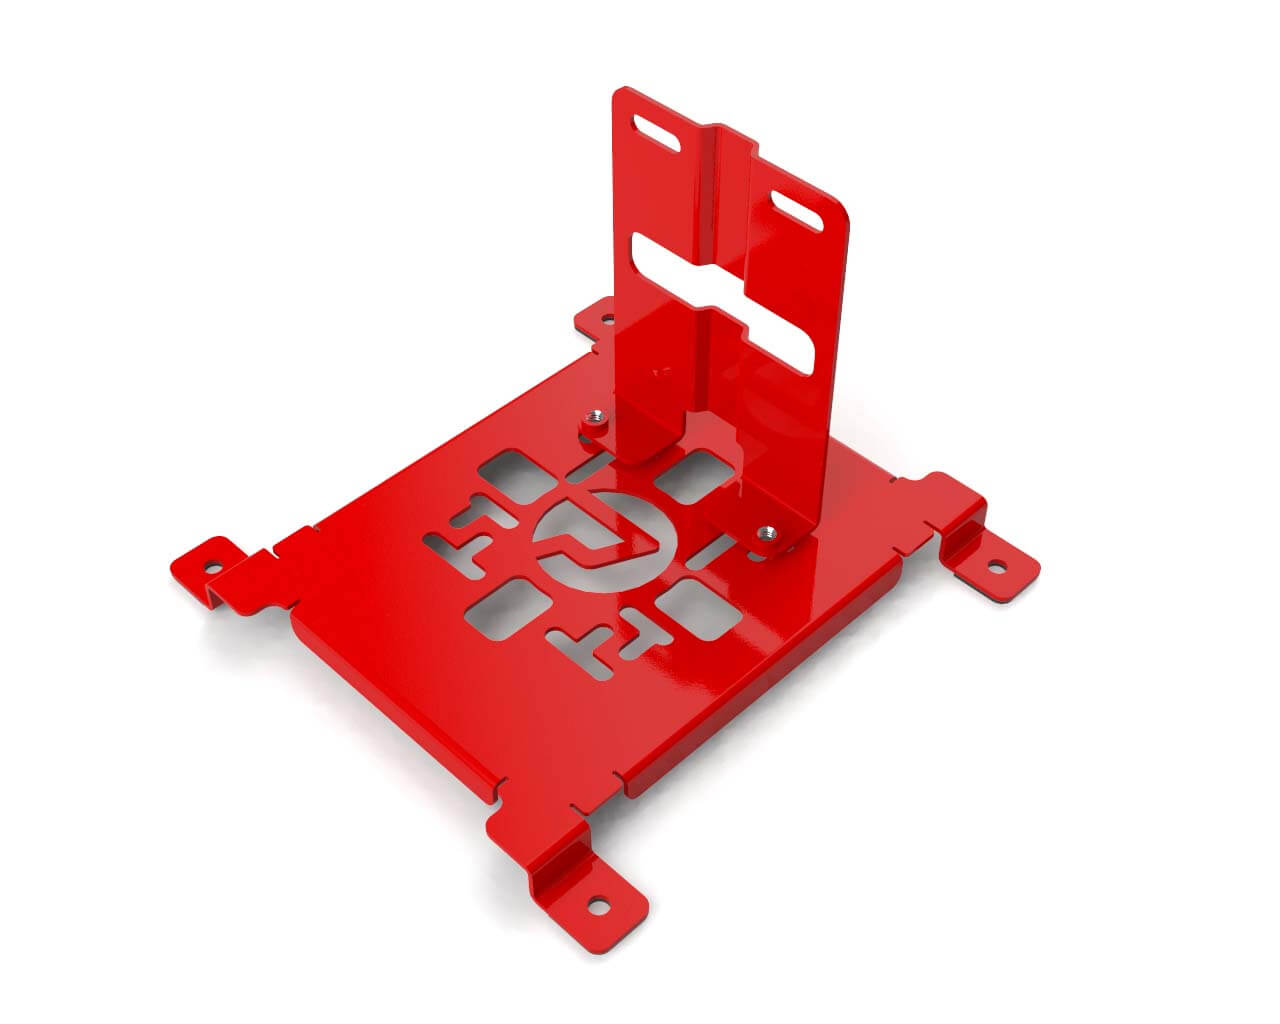 PrimoChill SX CTR2 Spider Mount Bracket Kit - 140mm Series - PrimoChill - KEEPING IT COOL UV Red